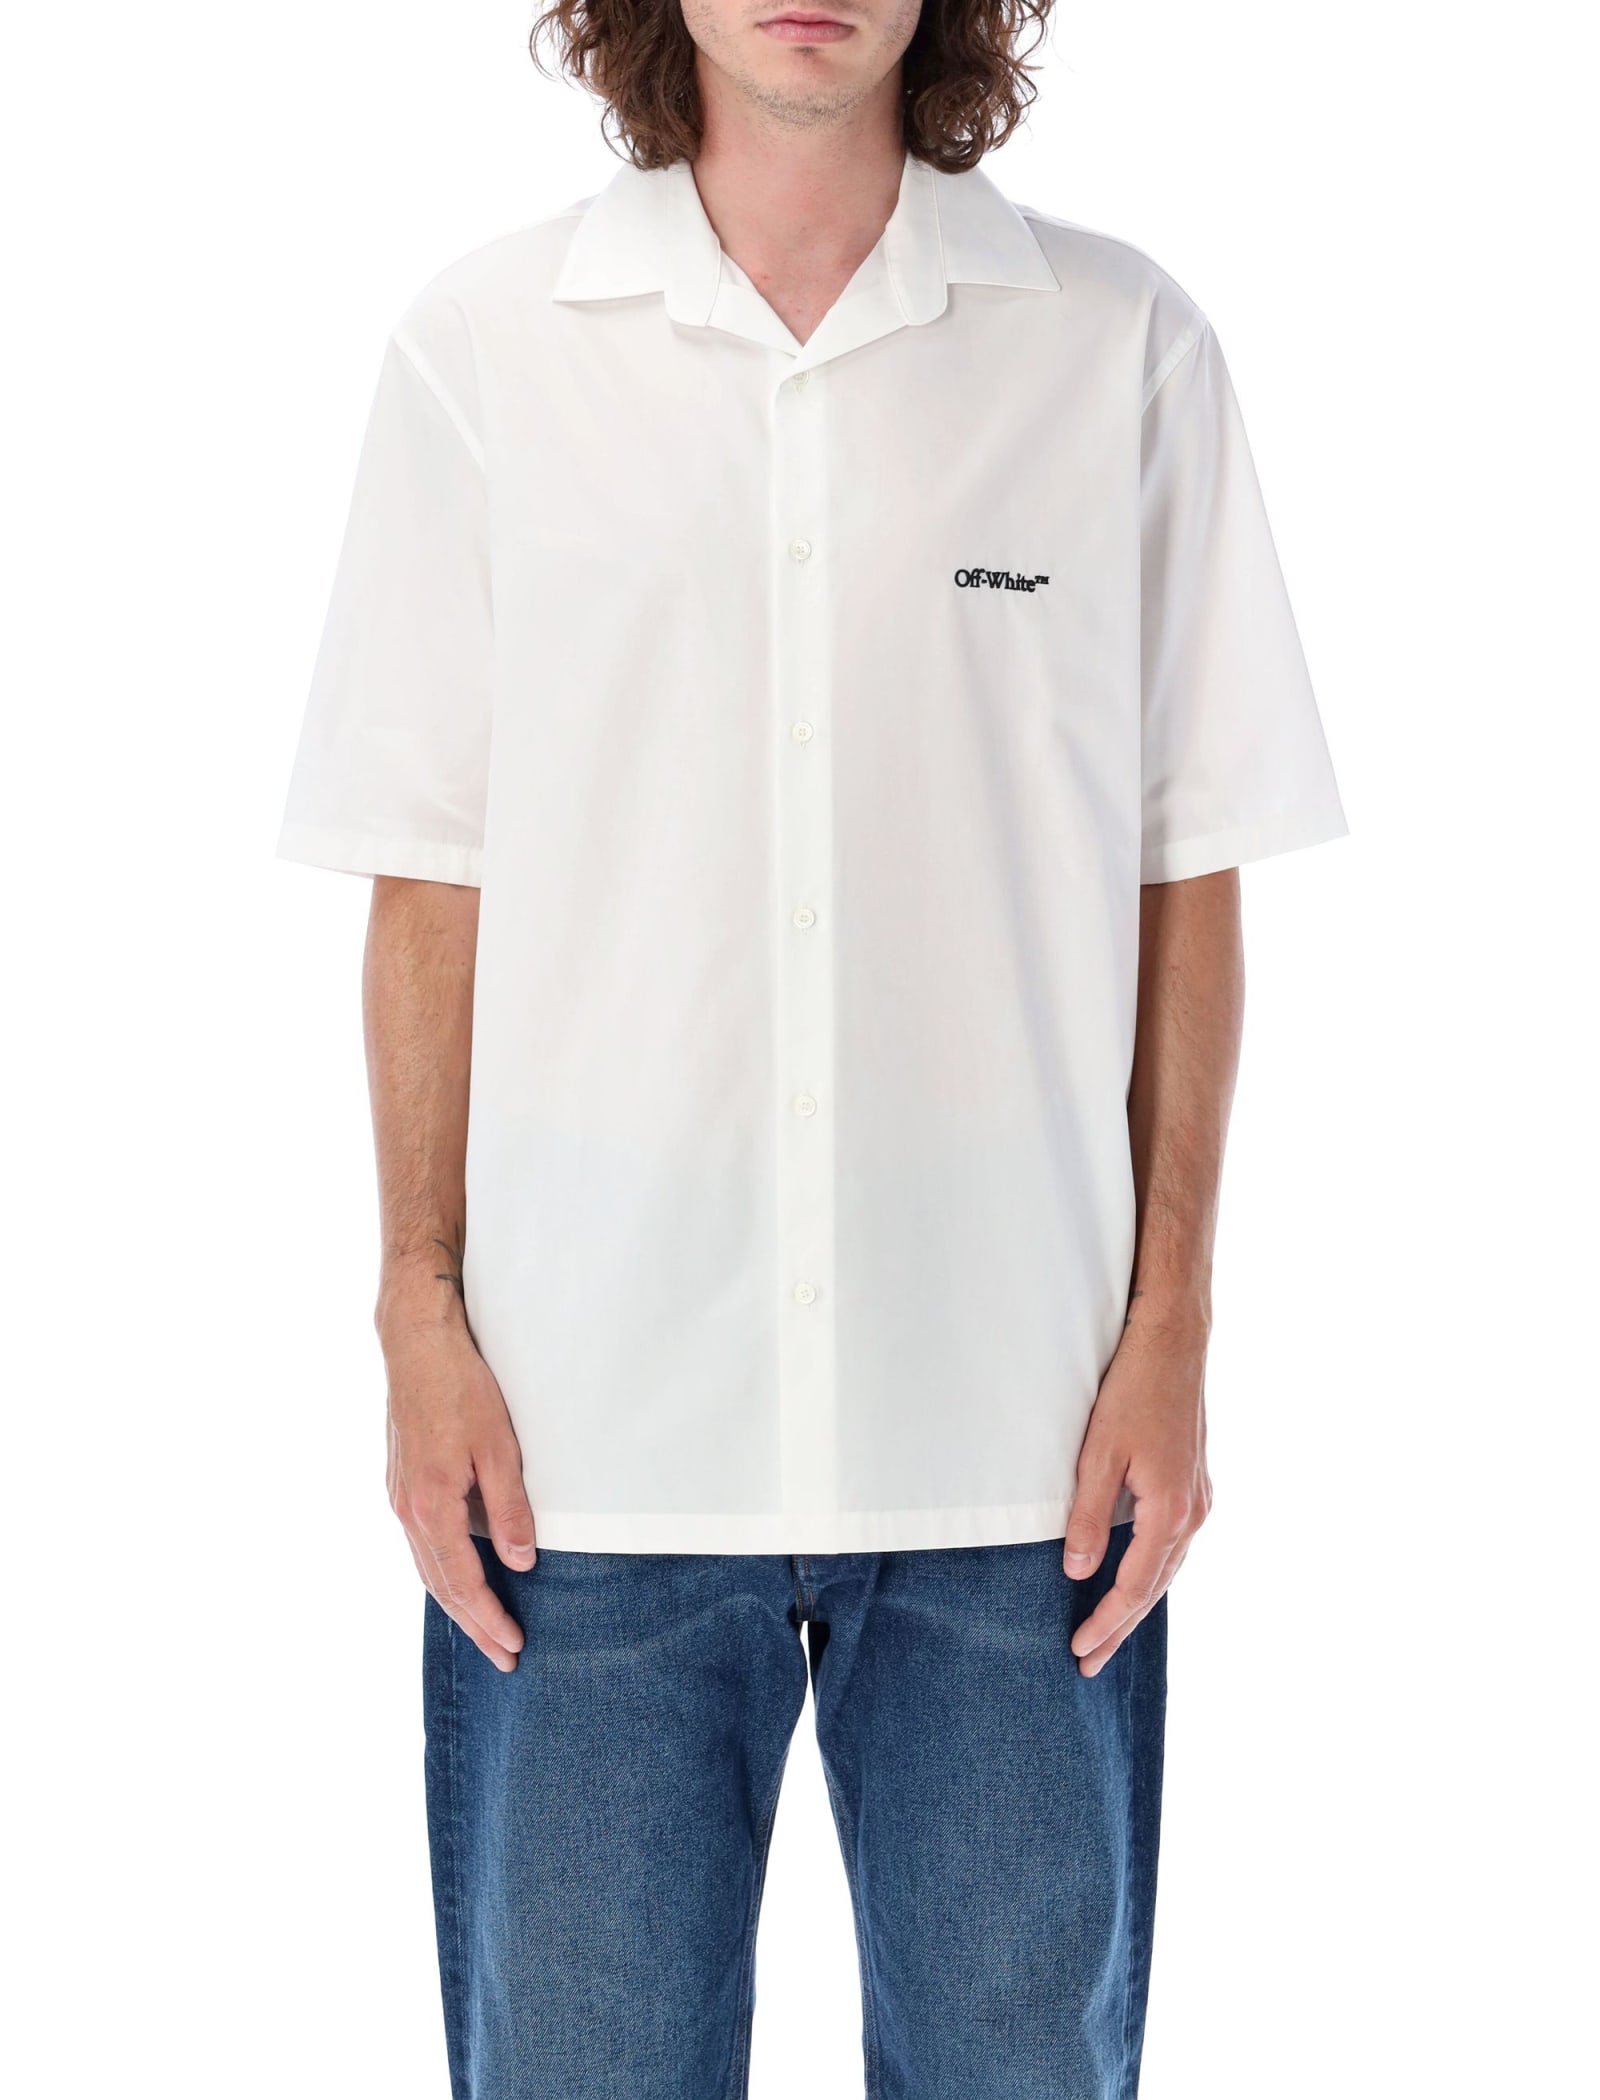 Off-white Gothic Arrow Bowling Shirt In White